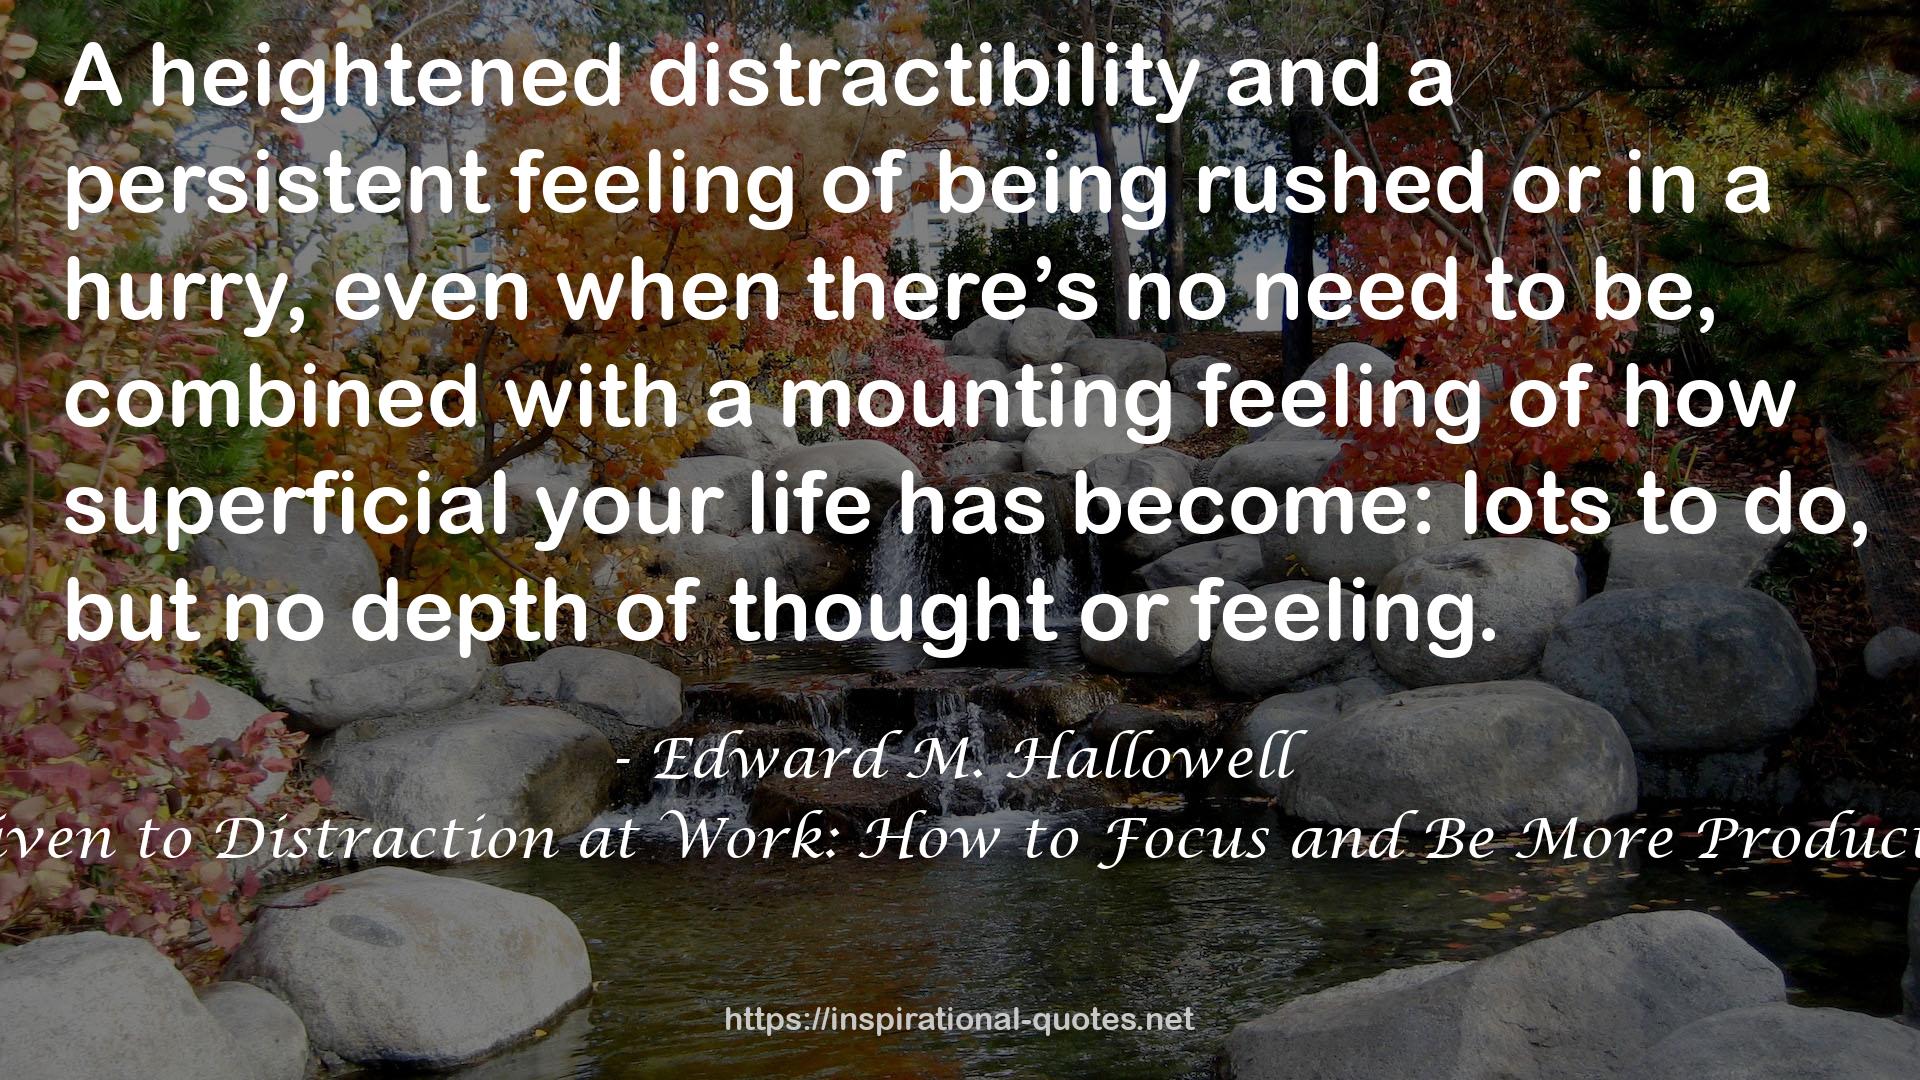 Driven to Distraction at Work: How to Focus and Be More Productive QUOTES